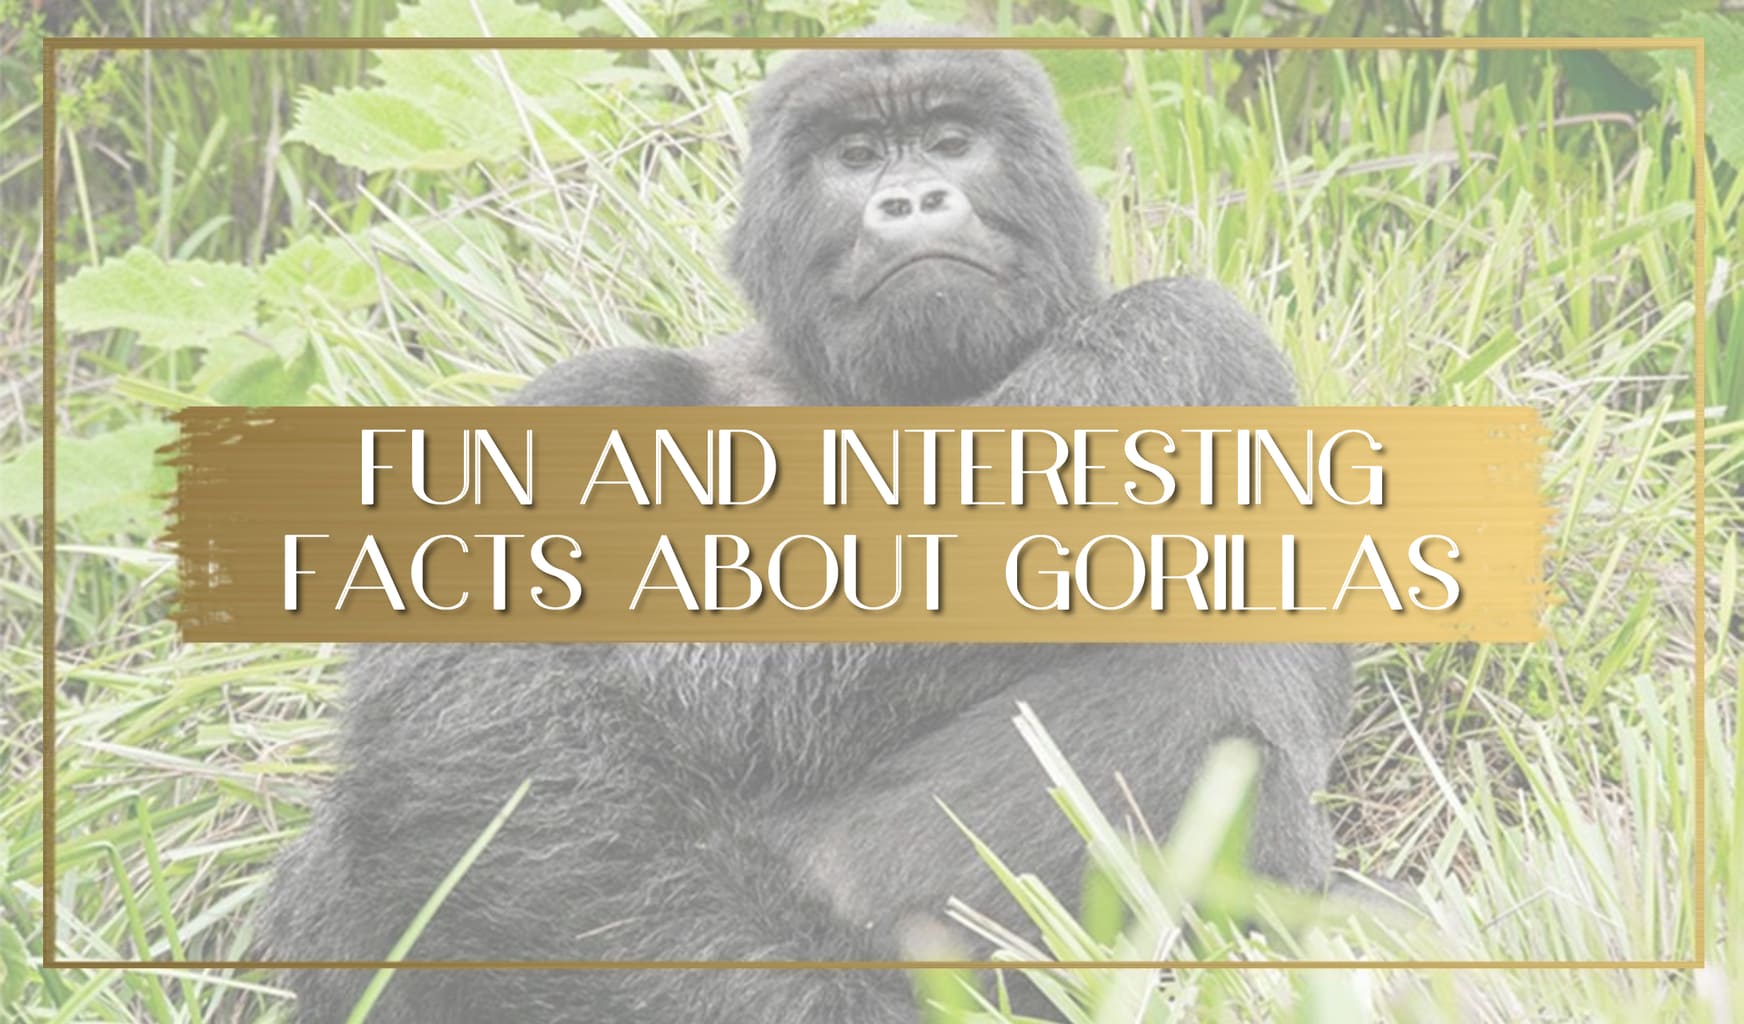 Facts about gorillas main